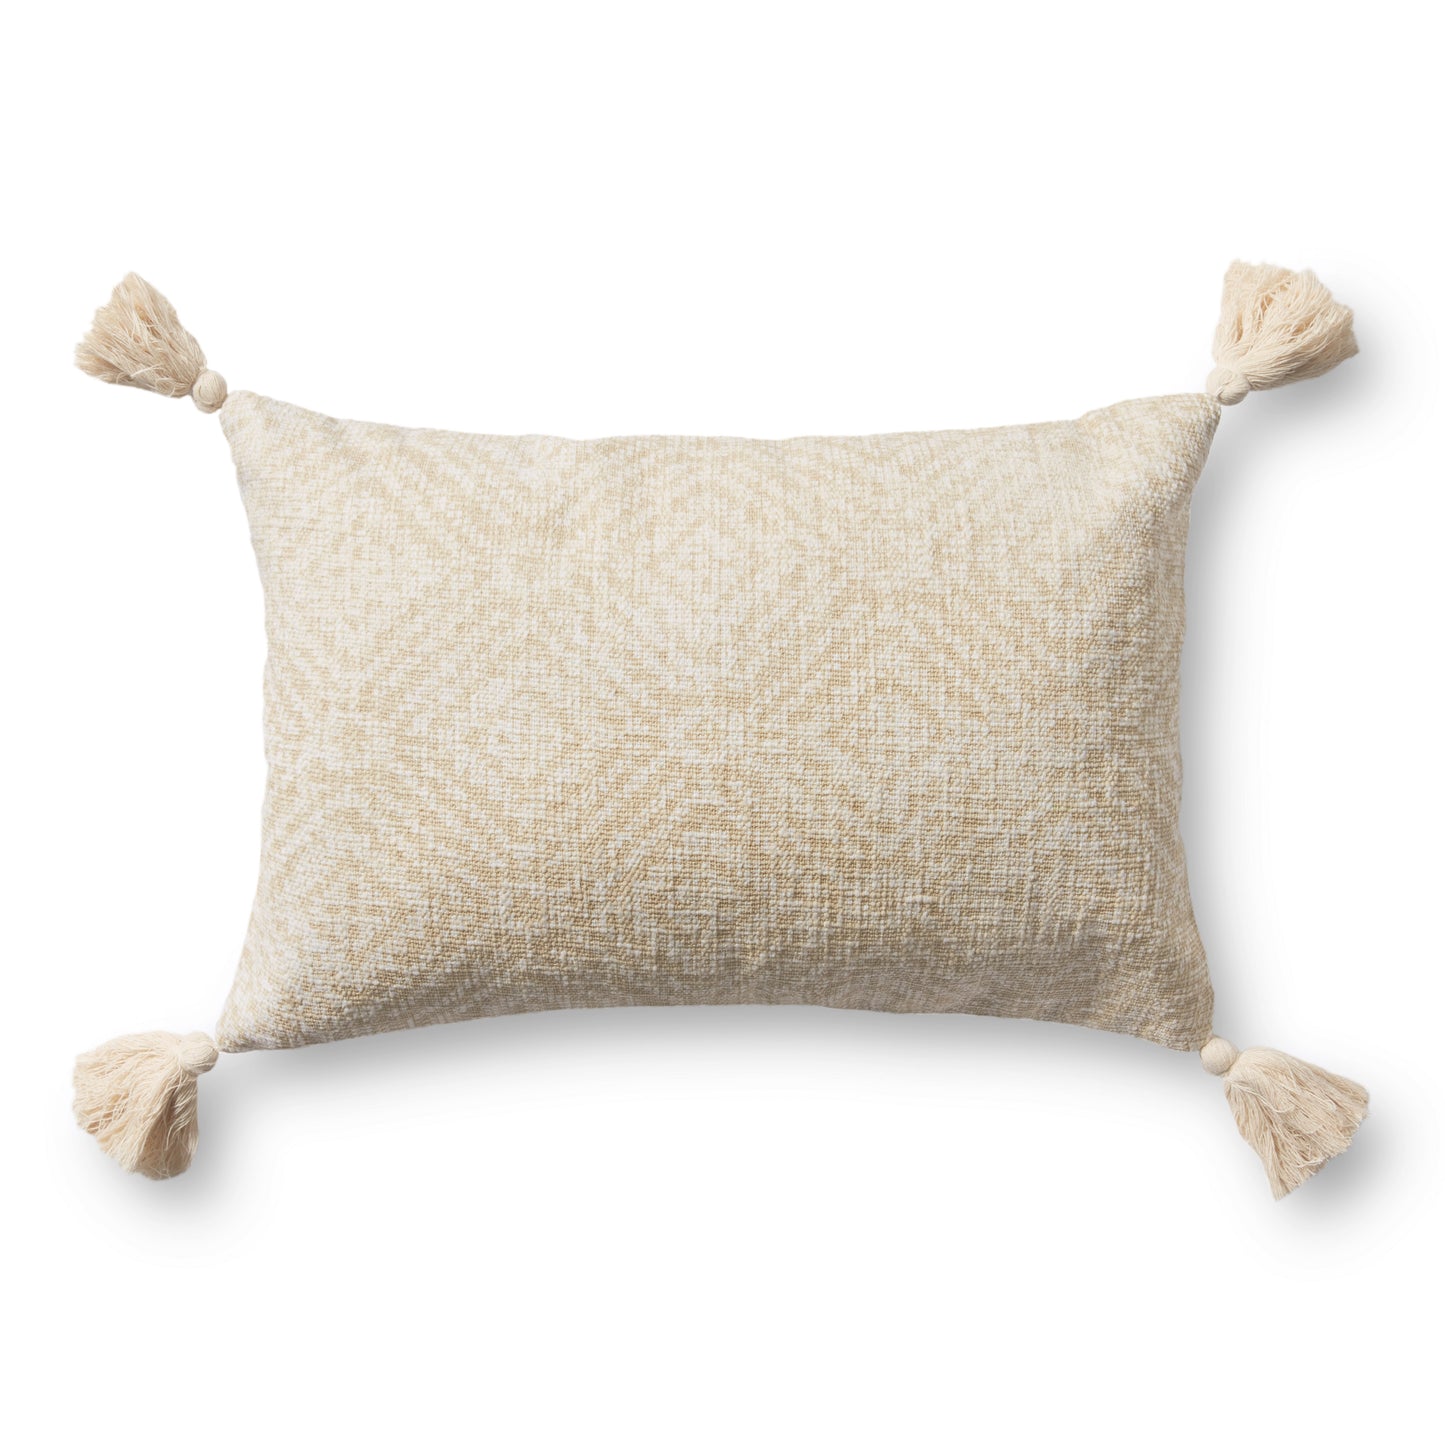 PILLOWS P0621 Cotton Indoor Pillow from Loloi